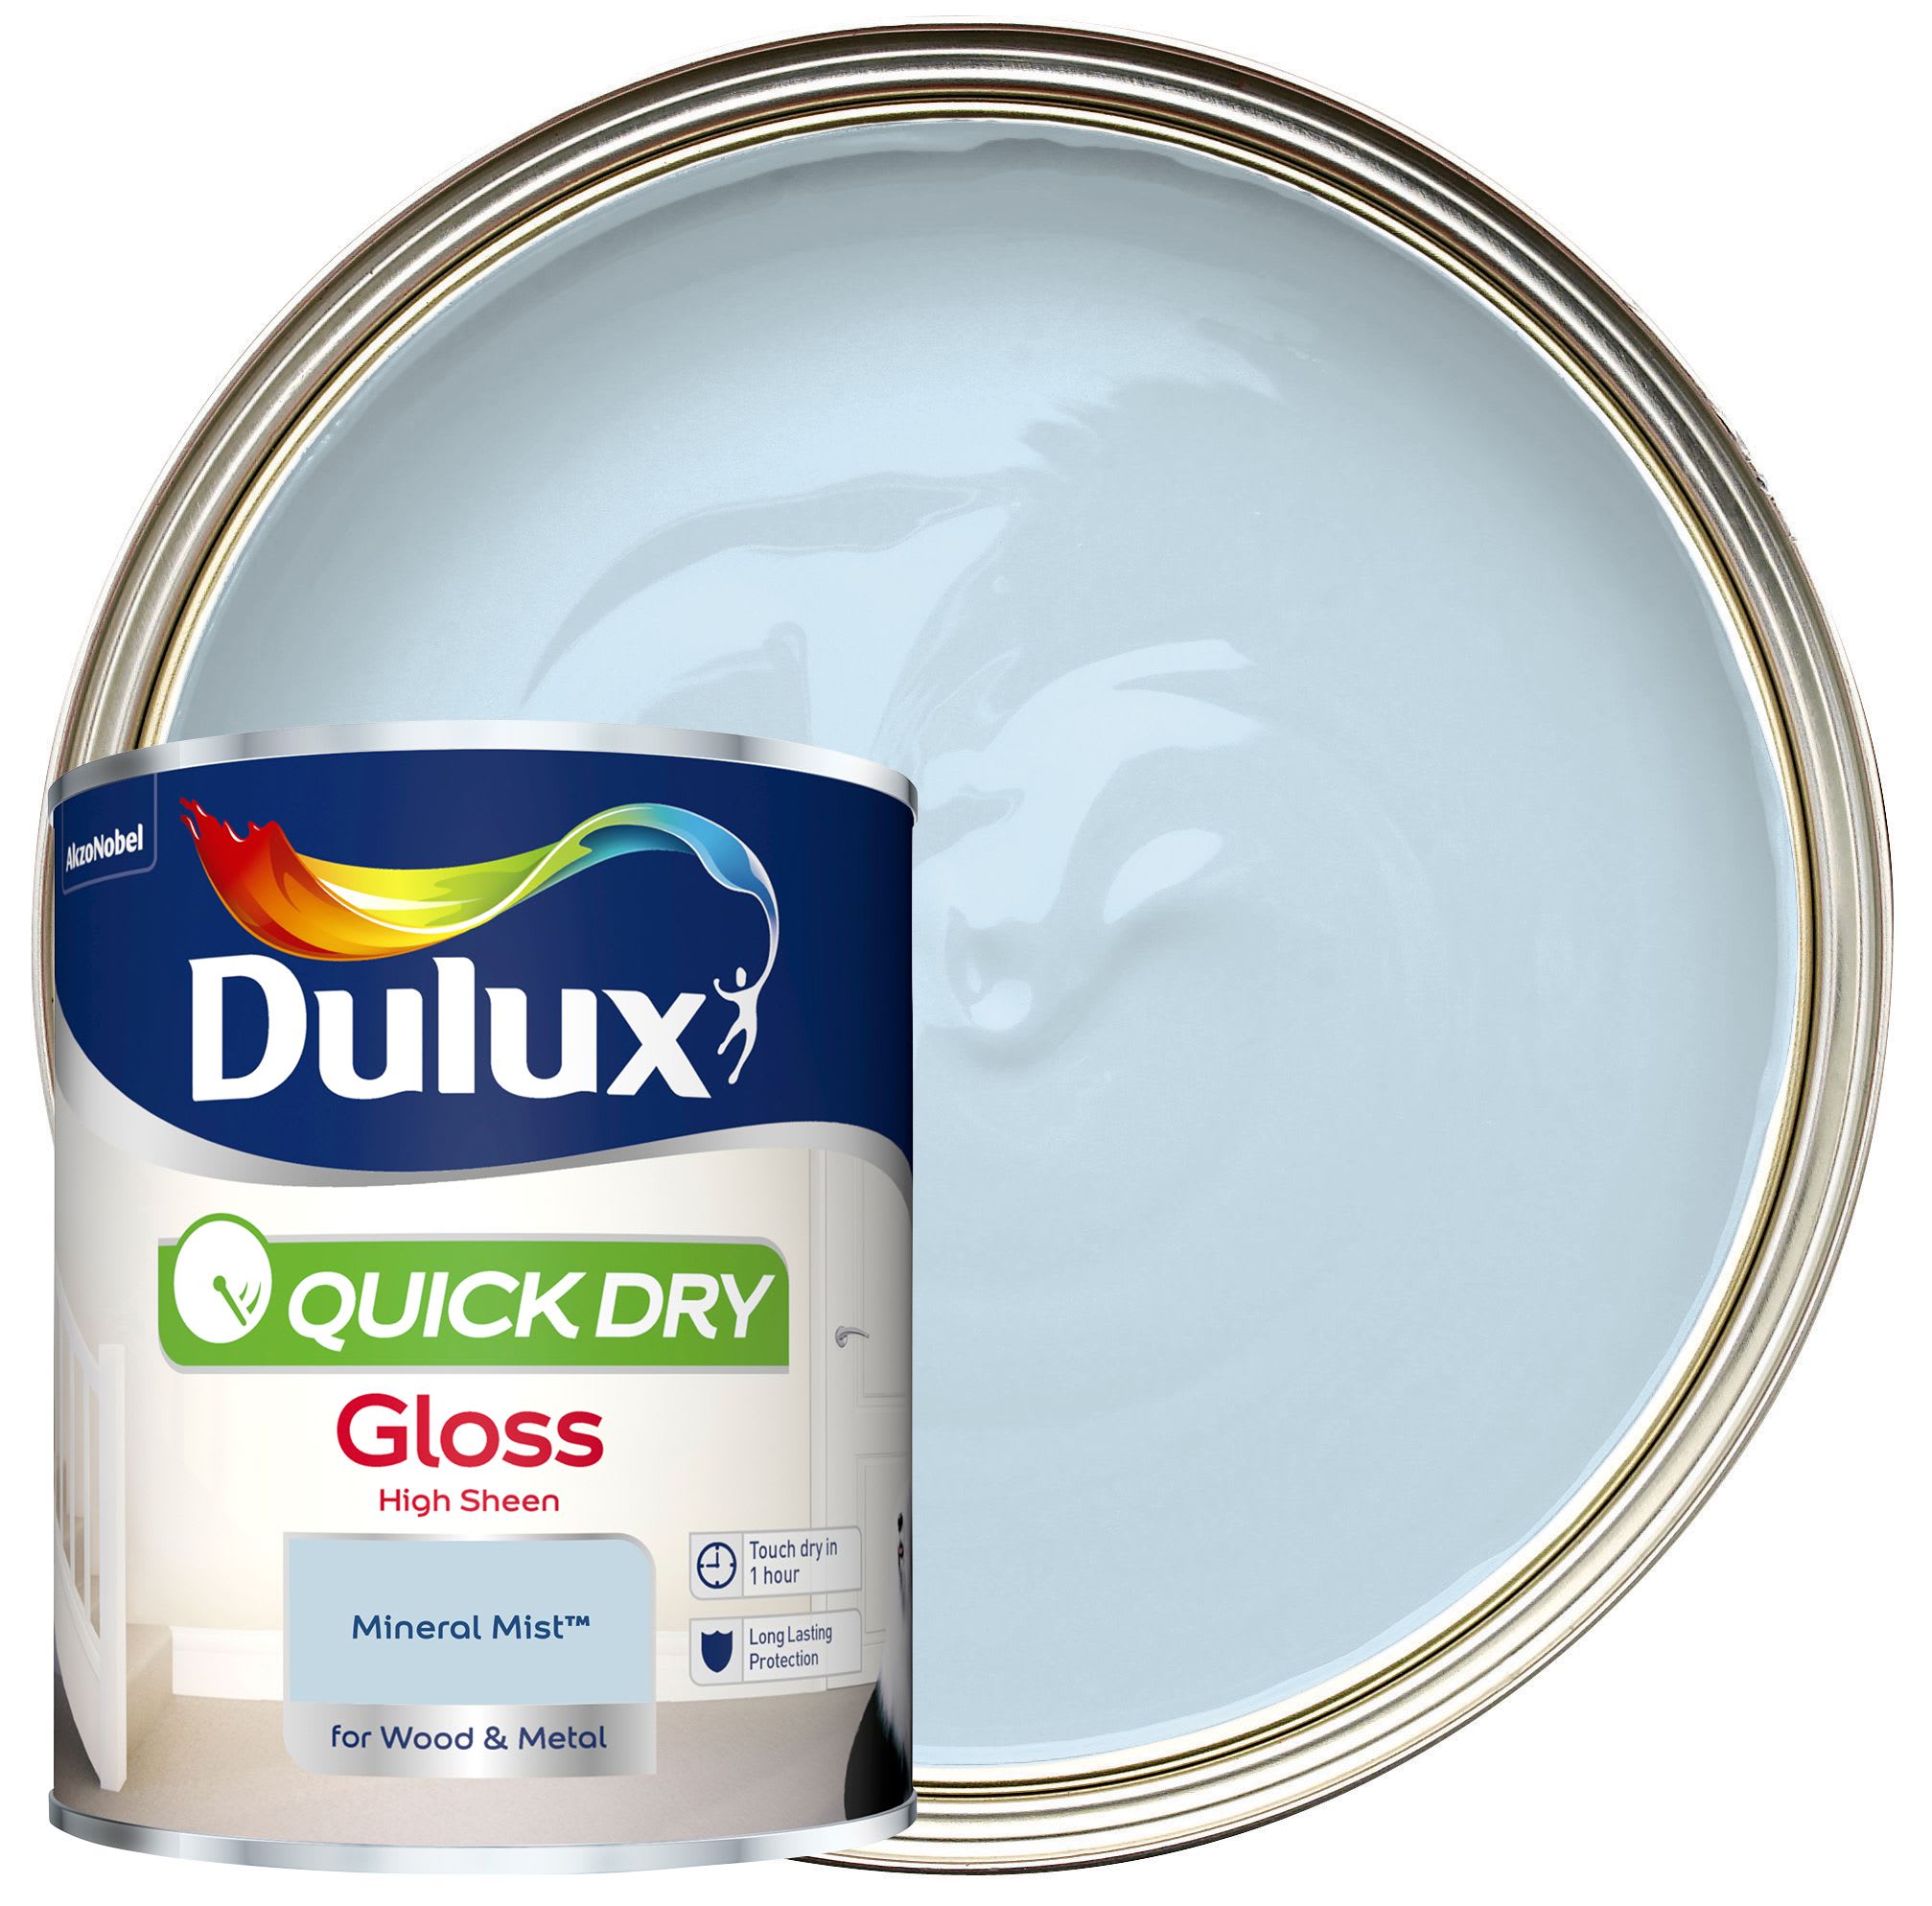 Dulux Quick Drying Gloss Paint - Mineral Mist